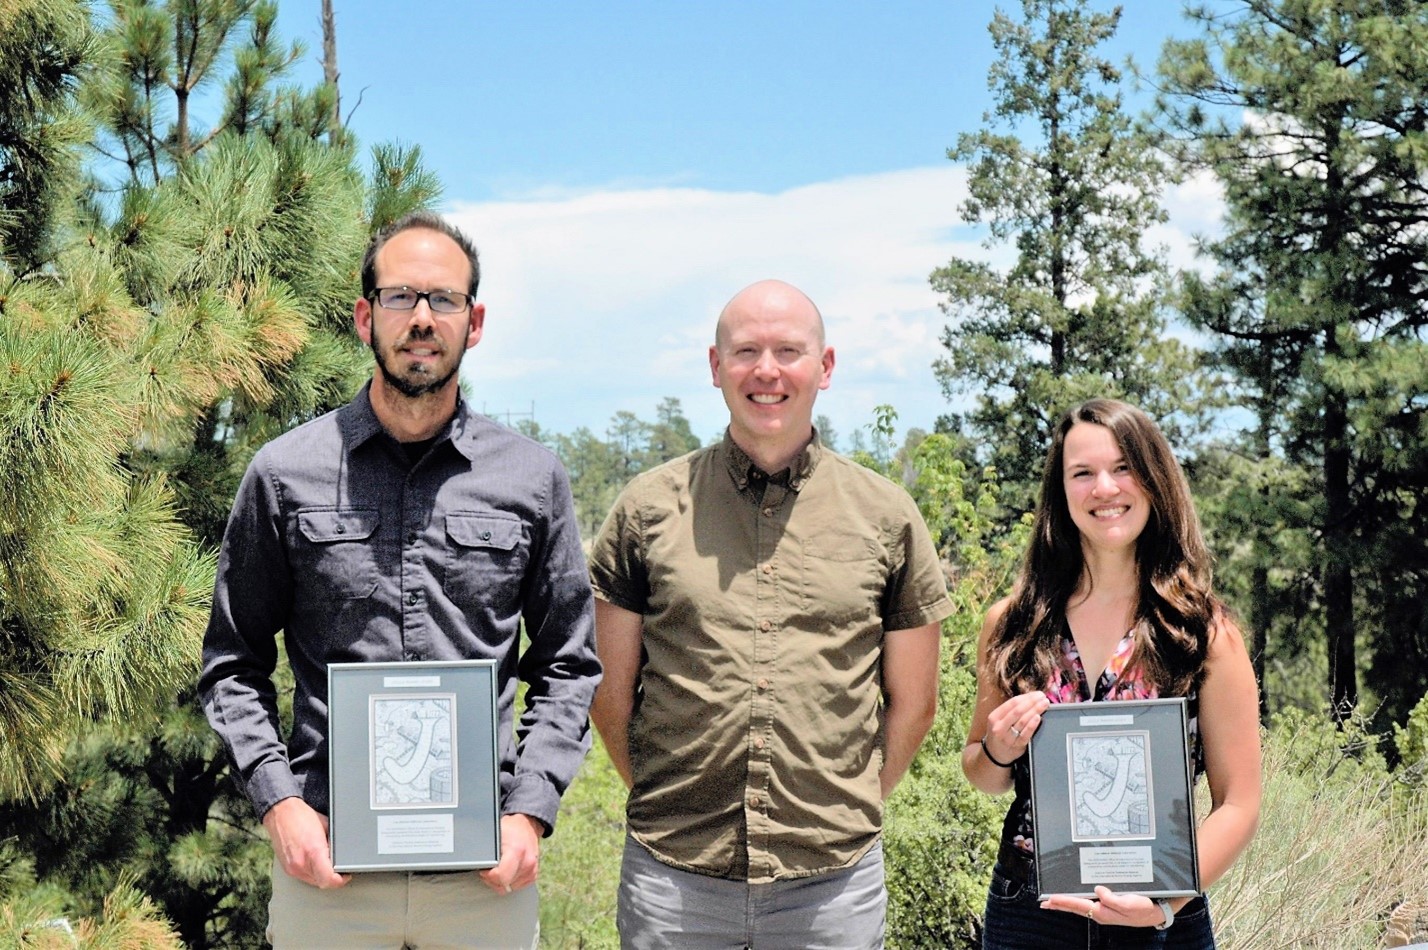 Travis Tenner (center) with Ben Naes and Kim Wurth displaying the team’s Joule awards.